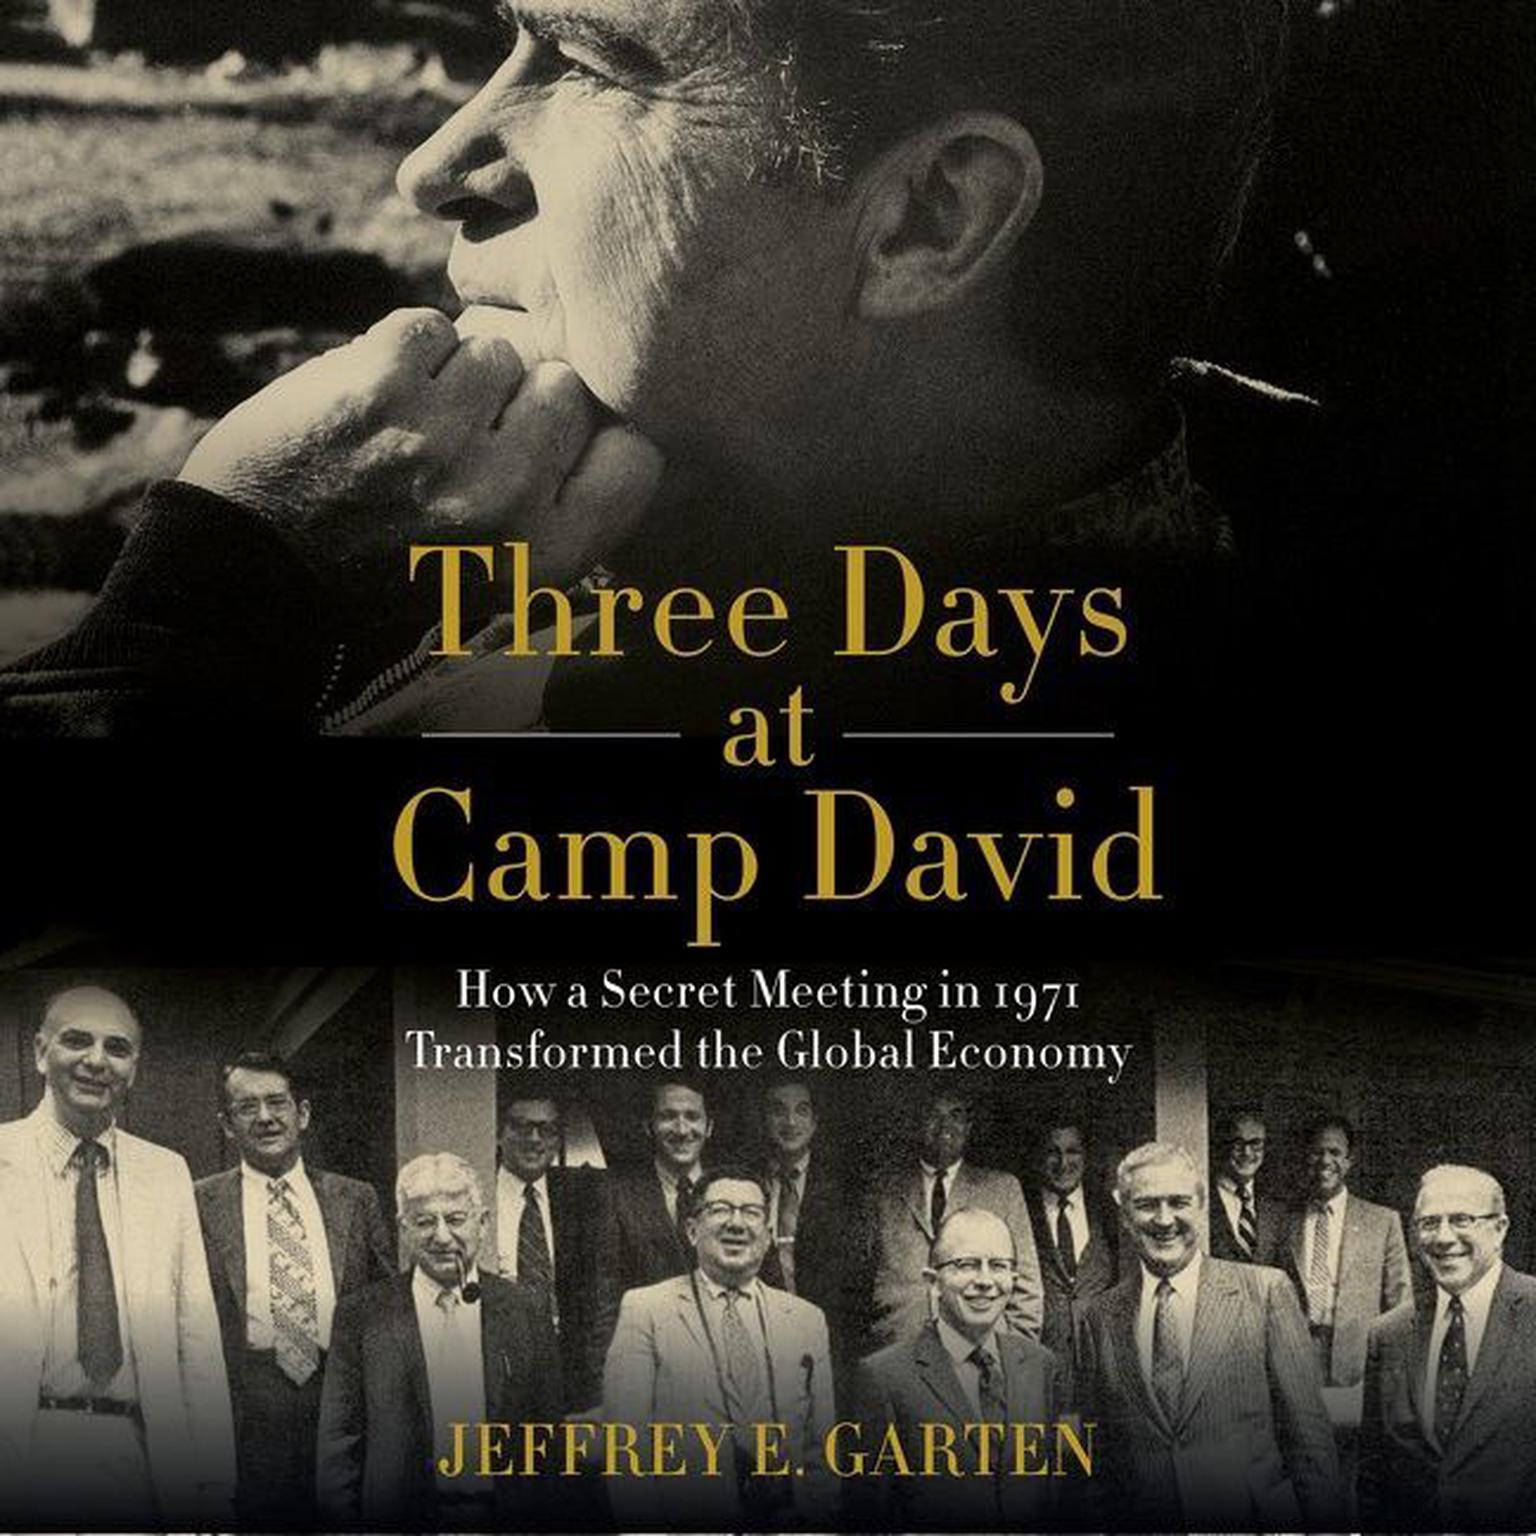 Three Days at Camp David: How a Secret Meeting in 1971 Transformed the Global Economy Audiobook, by Jeffrey E. Garten